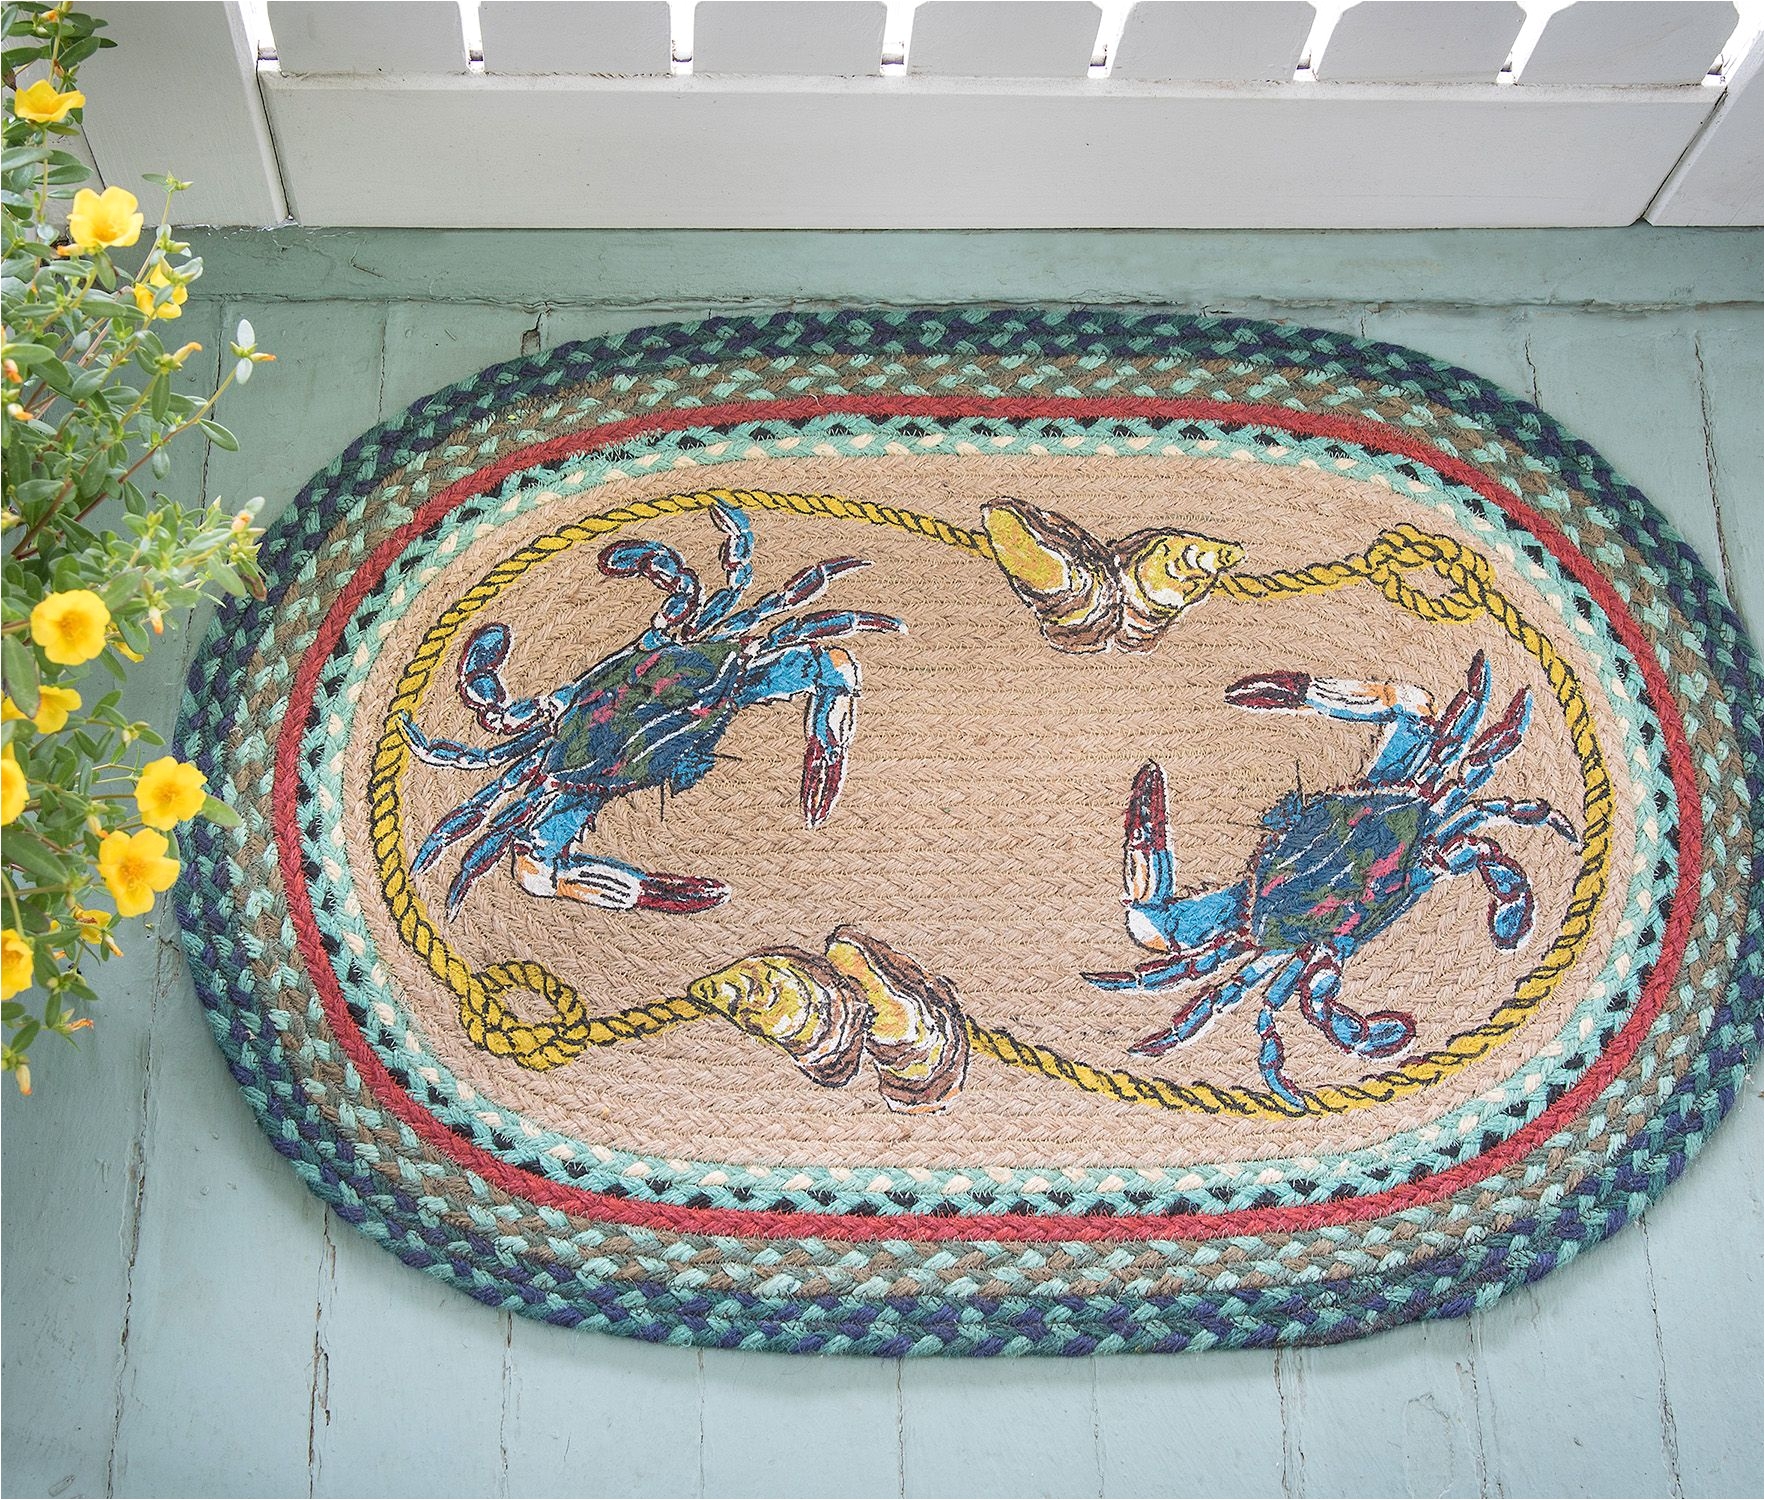 20x30 oval rug with blue crab design perfect for a beach cottage nautical